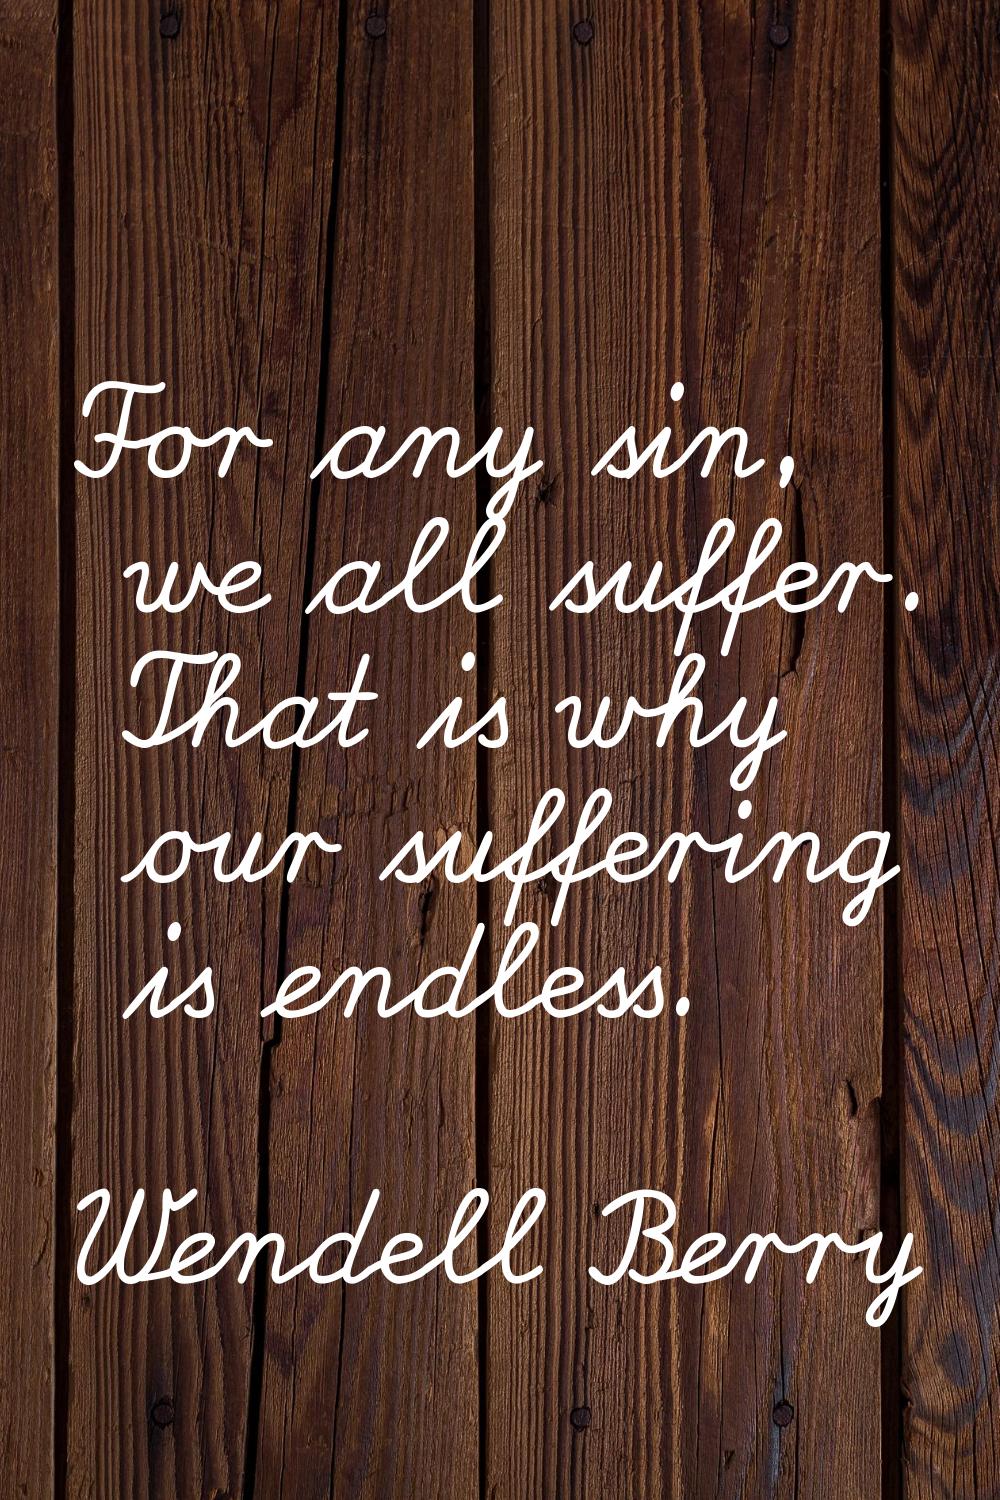 For any sin, we all suffer. That is why our suffering is endless.